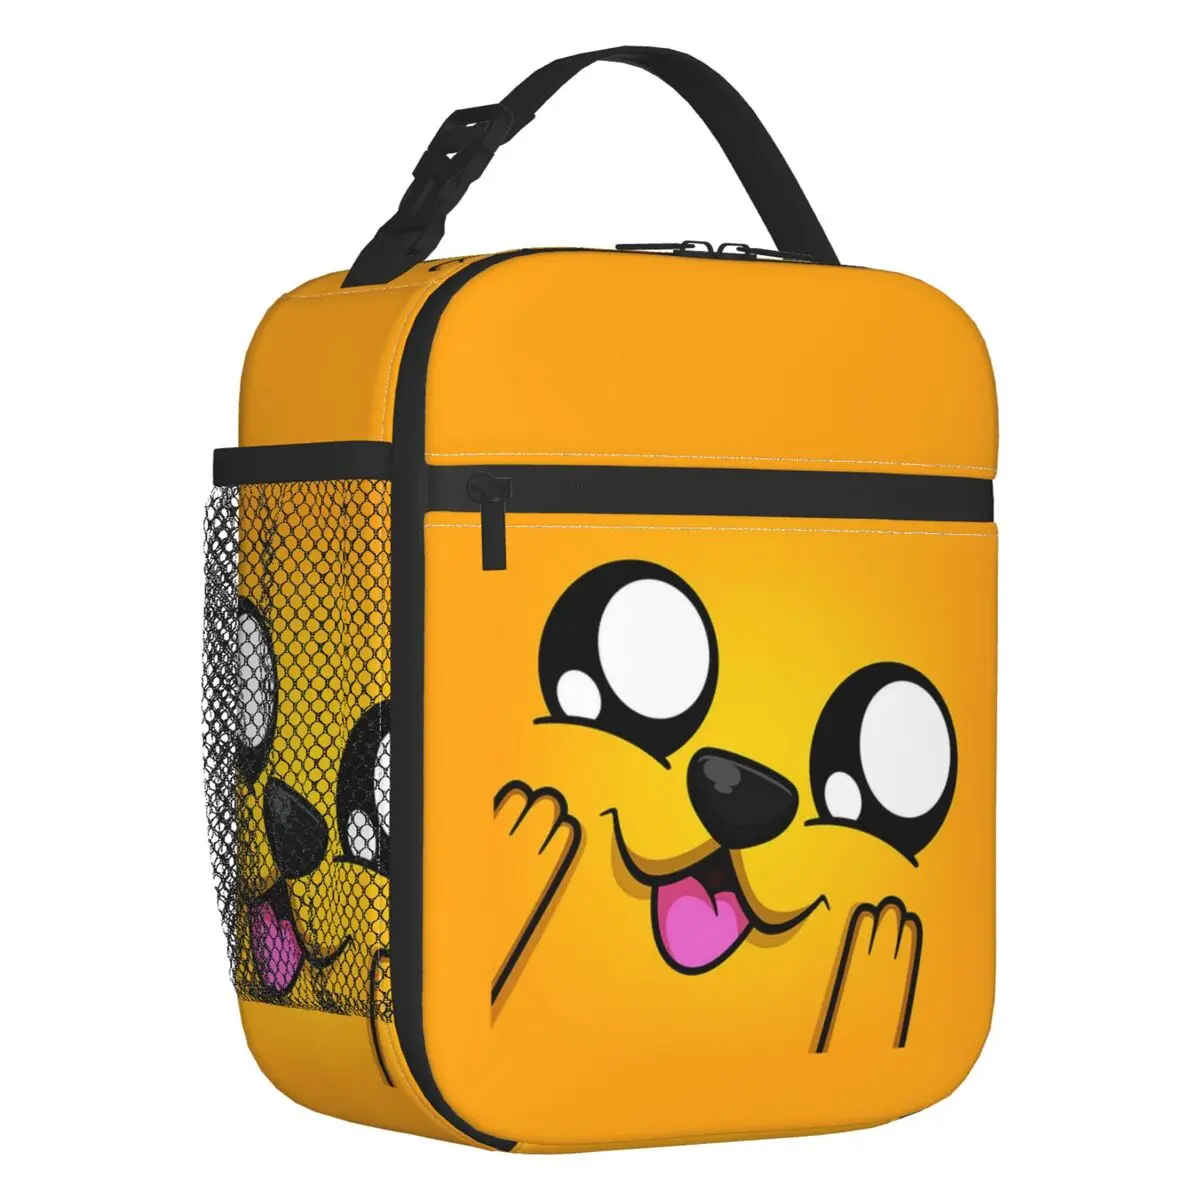 

Cute Mikecrack Funny Meme Insulated Lunch Bag for Women Leakproof Cartoon Thermal Cooler Lunch Box Beach Camping Travel